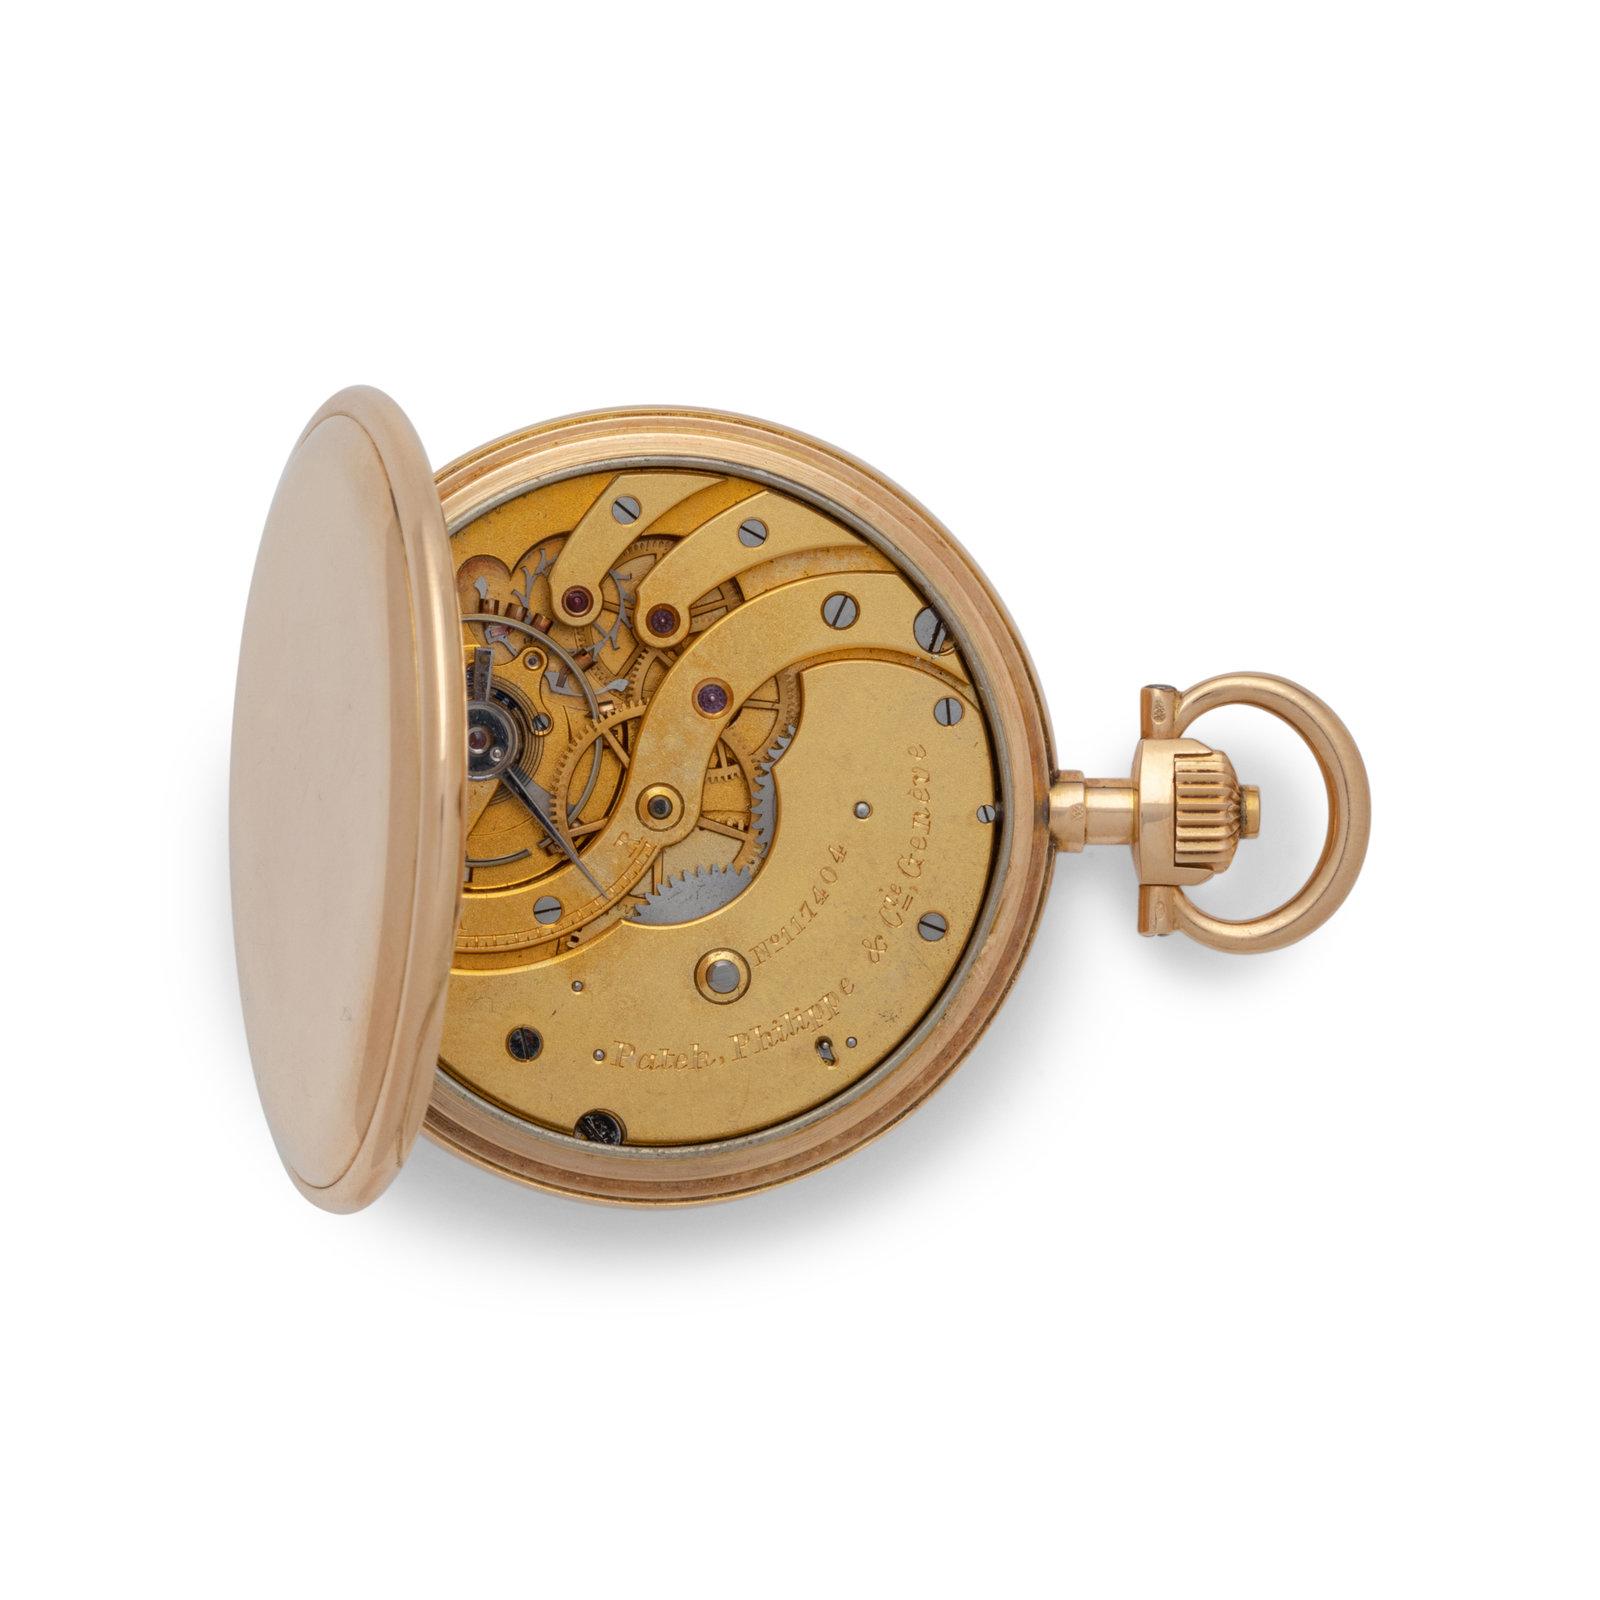 PATEK PHILIPPE & CIE., 18K YELLOW GOLD HUNTING CASED LEVEL WITH ENAMEL  IMPERIAL ARMS OF EMPEROR FRANZ JOSEPH OF AUSTRIA POCKET WATCH